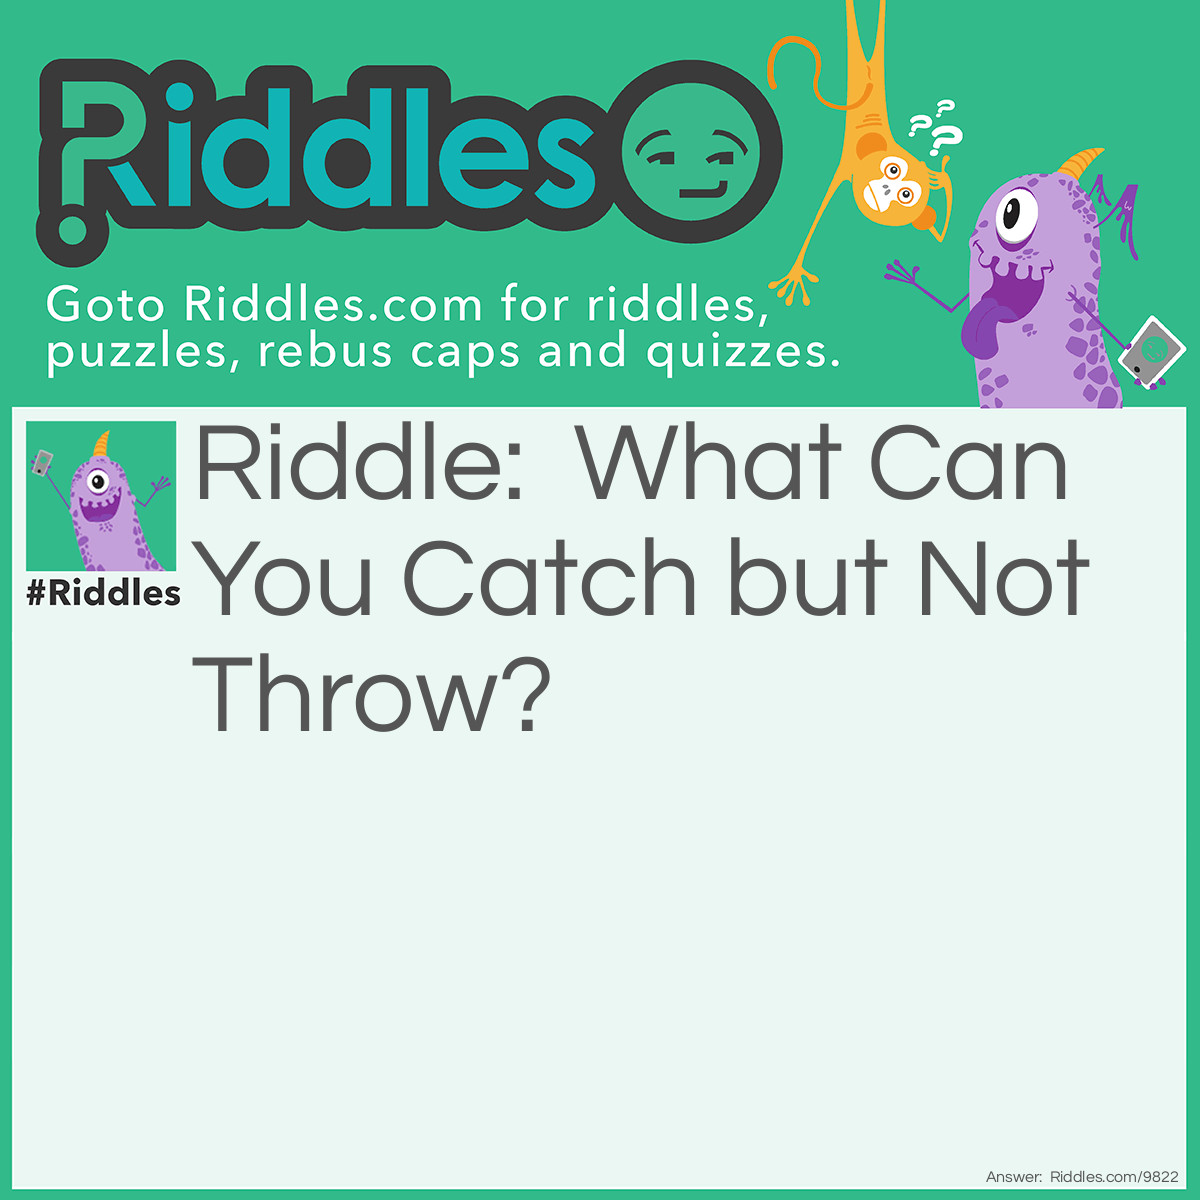 Riddle: What Can You Catch but Not Throw? Answer: A cold